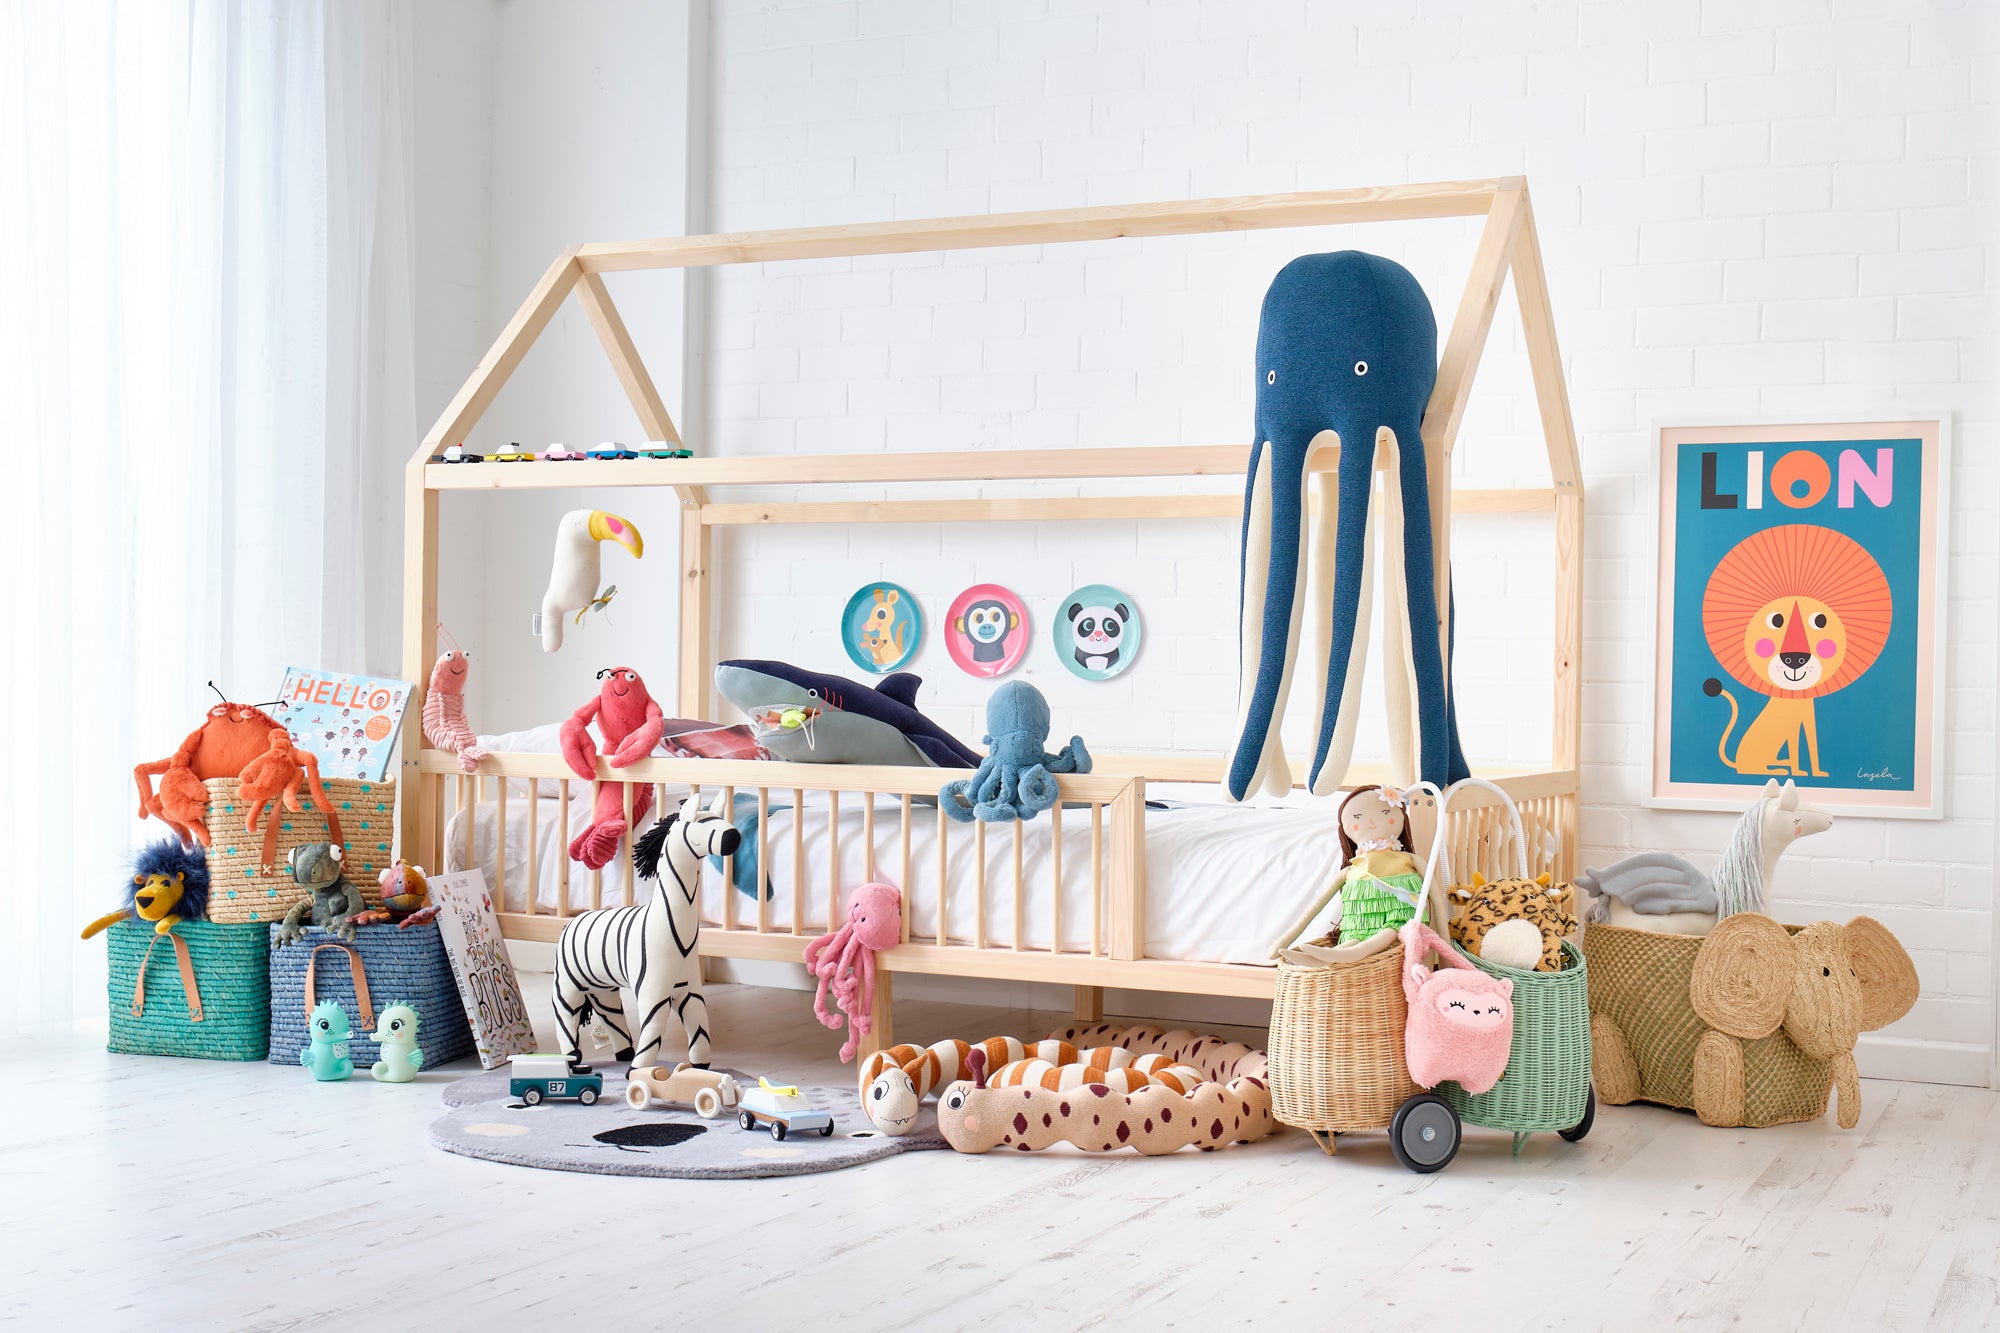 Treasure Island Children's Bedroom by Bobby Rabbit, to be featured in Our Royal Baby.